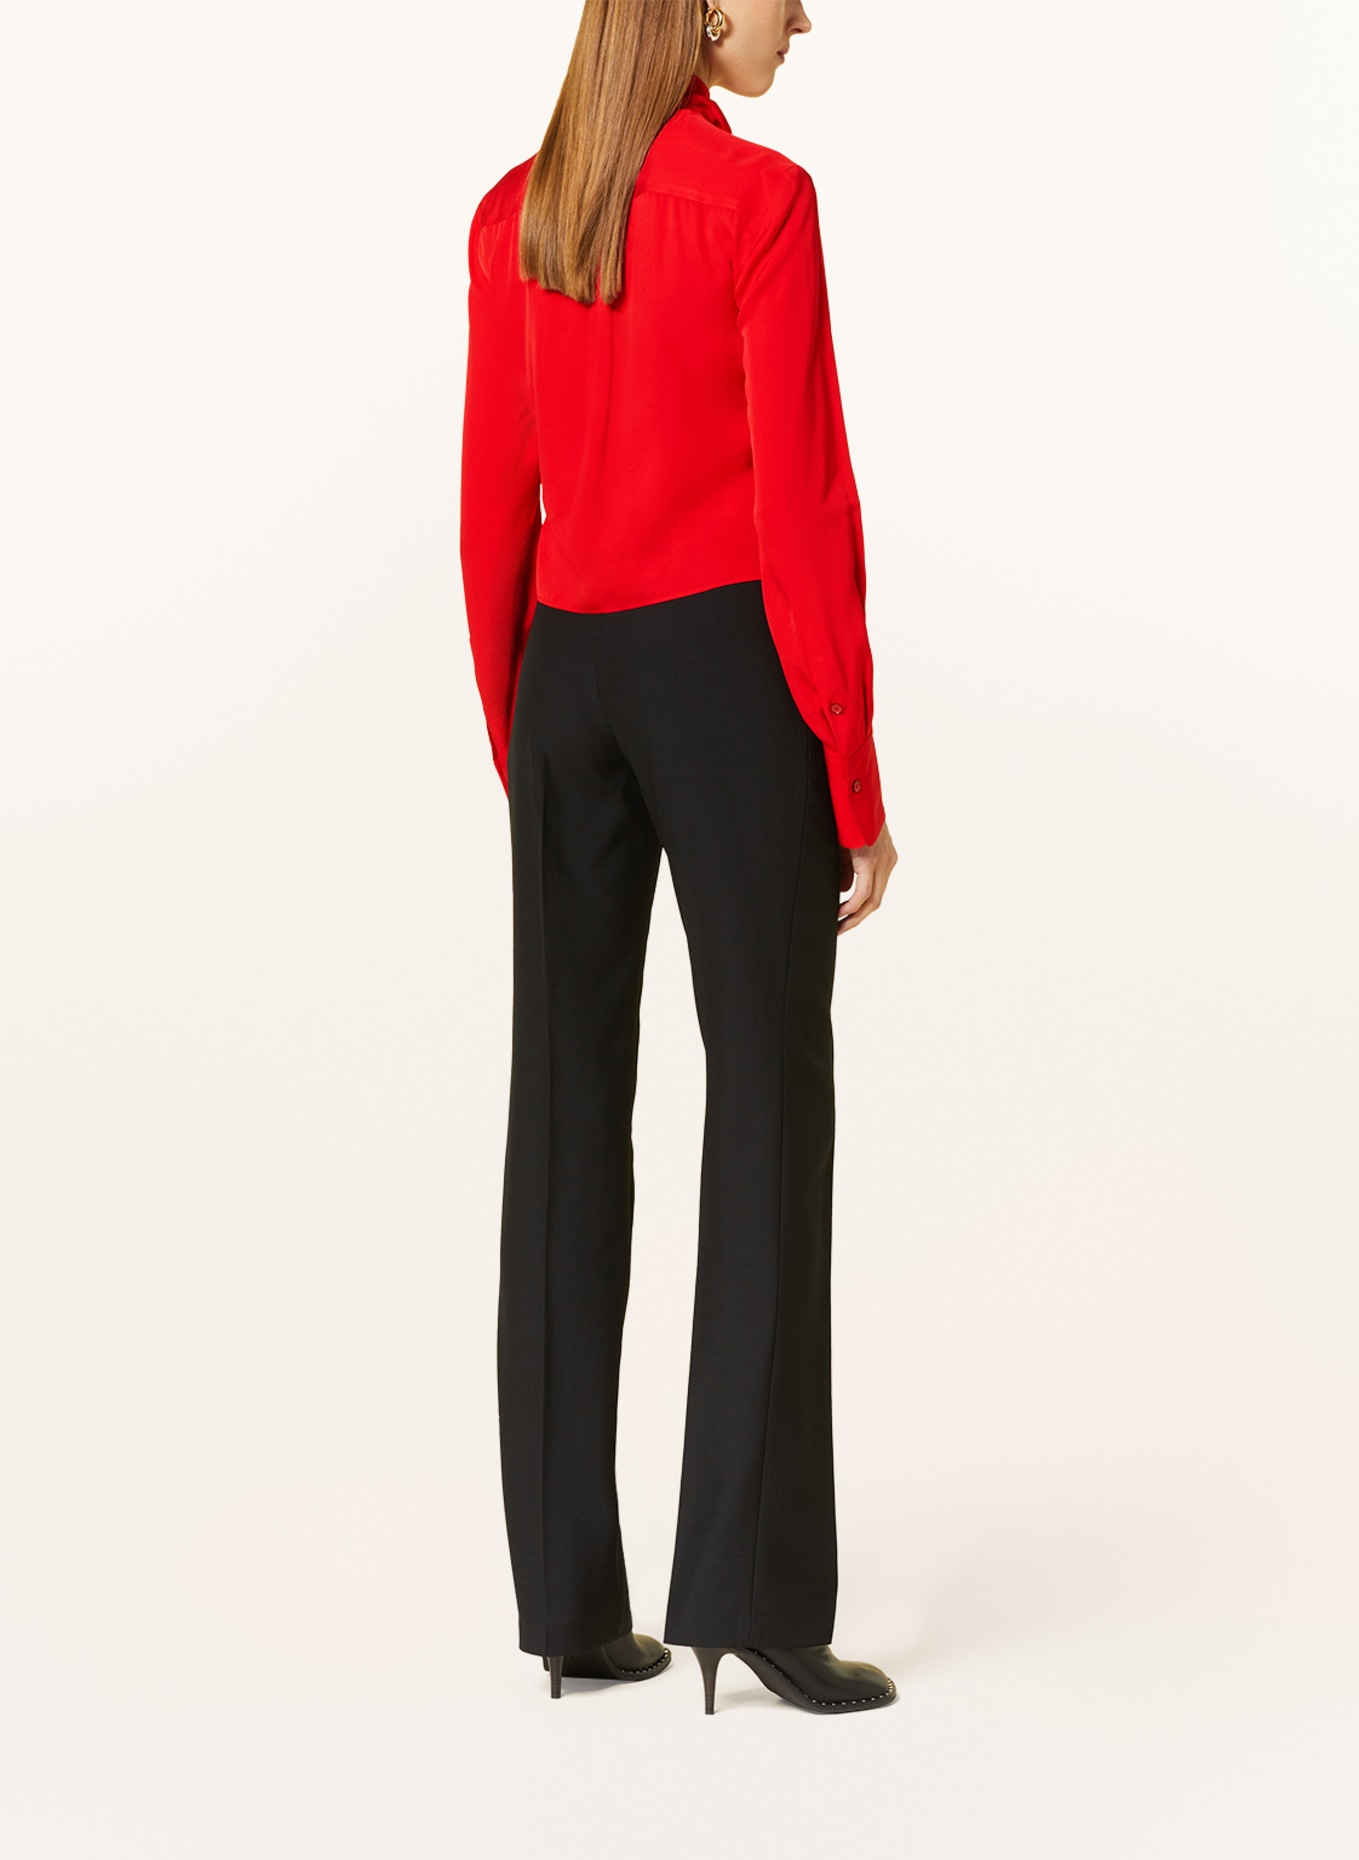 STELLA McCARTNEY Bow-tie blouse, Color: RED (Image 3)